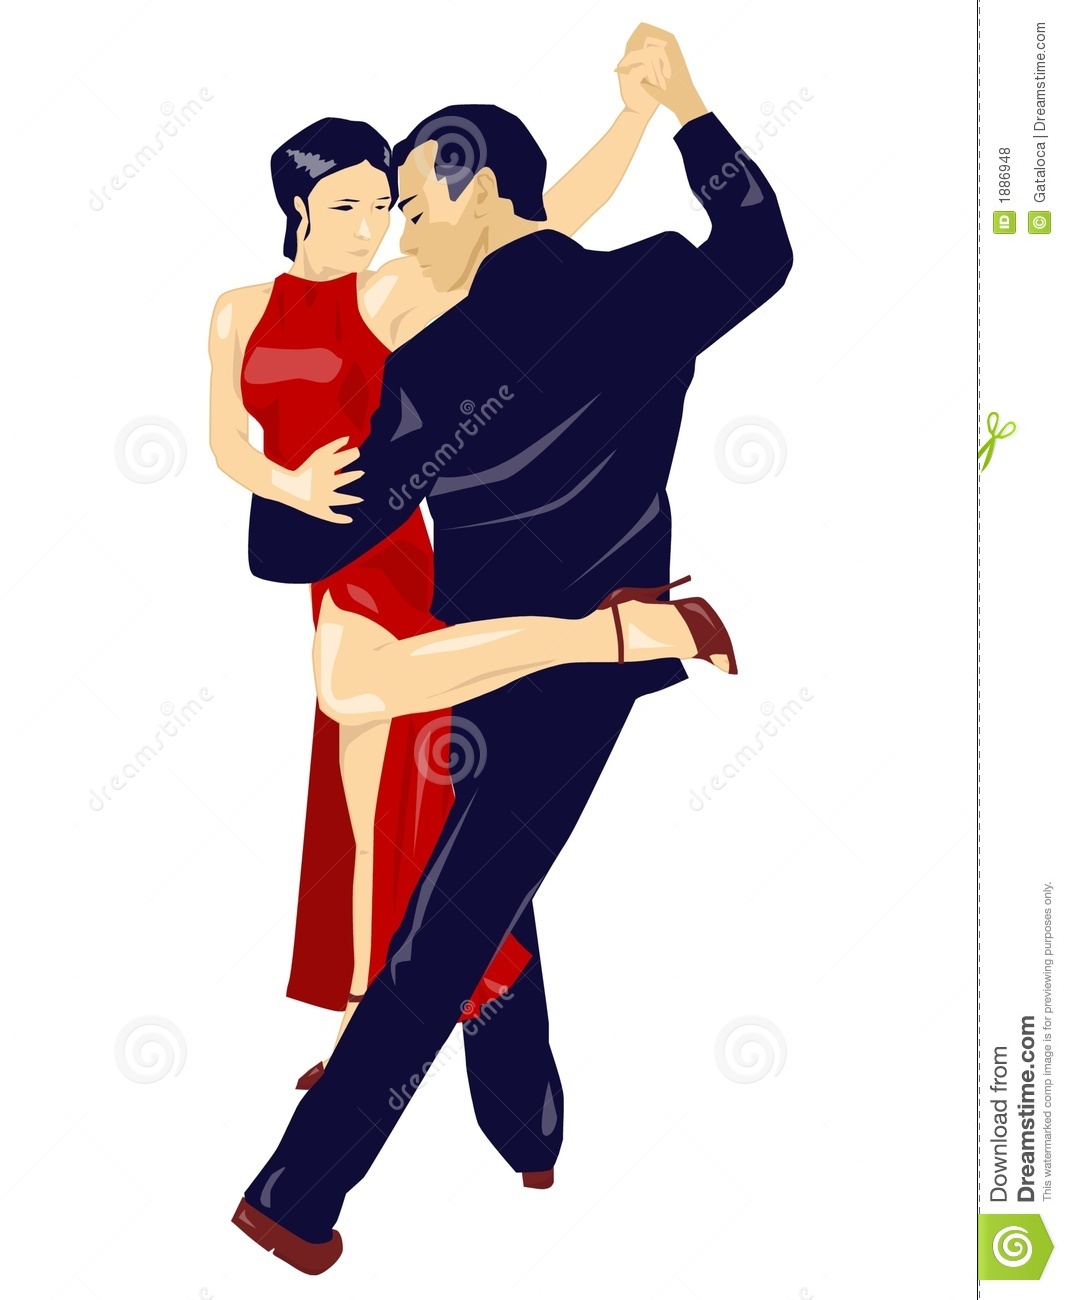 Tango Dancers Voleo Isolated Royalty Free Stock Photos Image Clipart